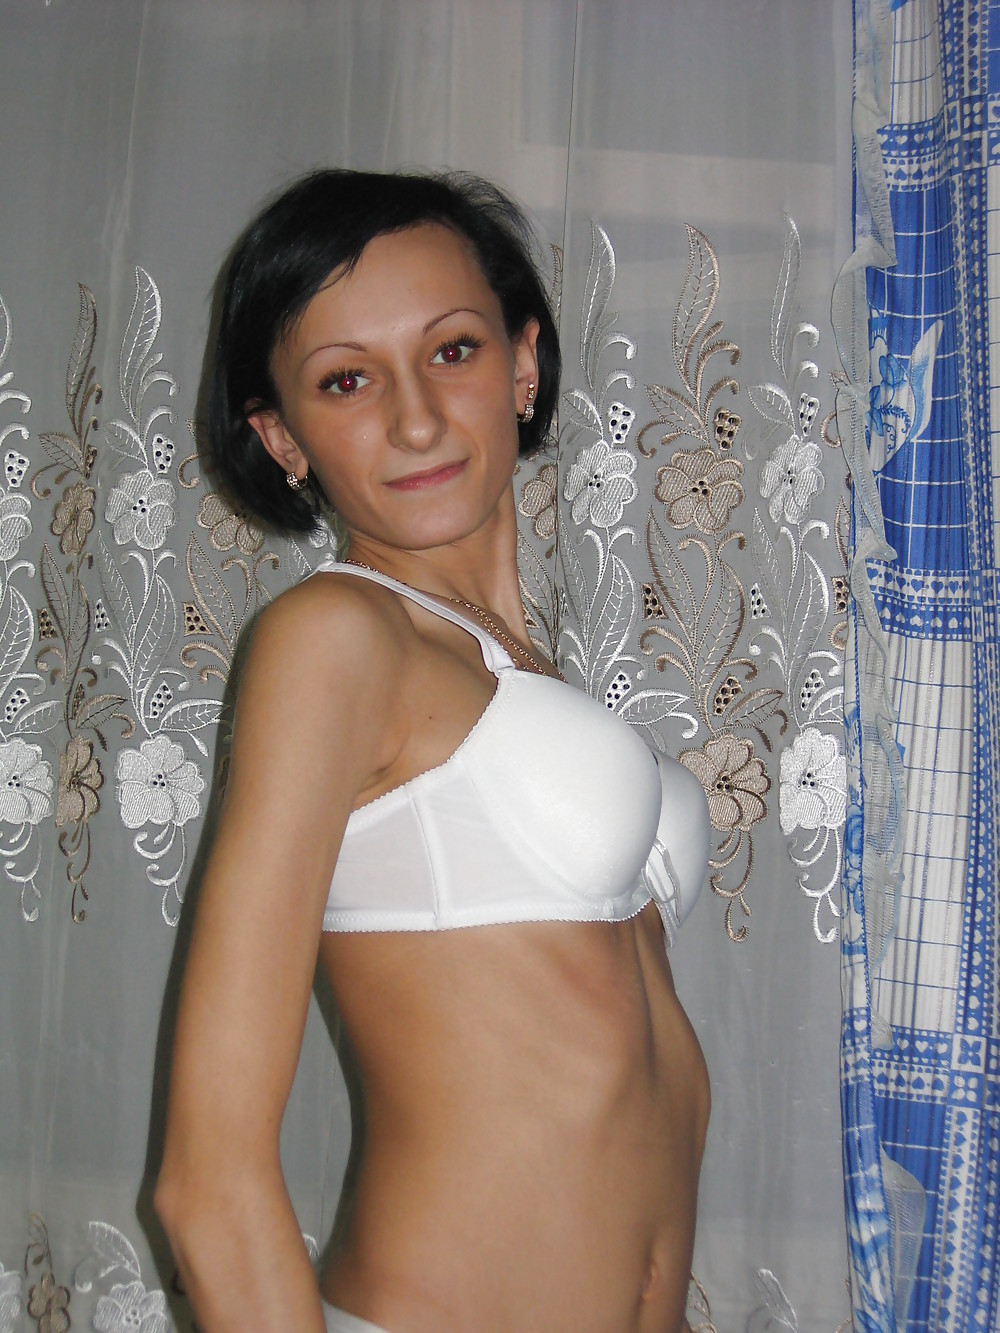 Russian girl (Ksenia) with no tits #15199183